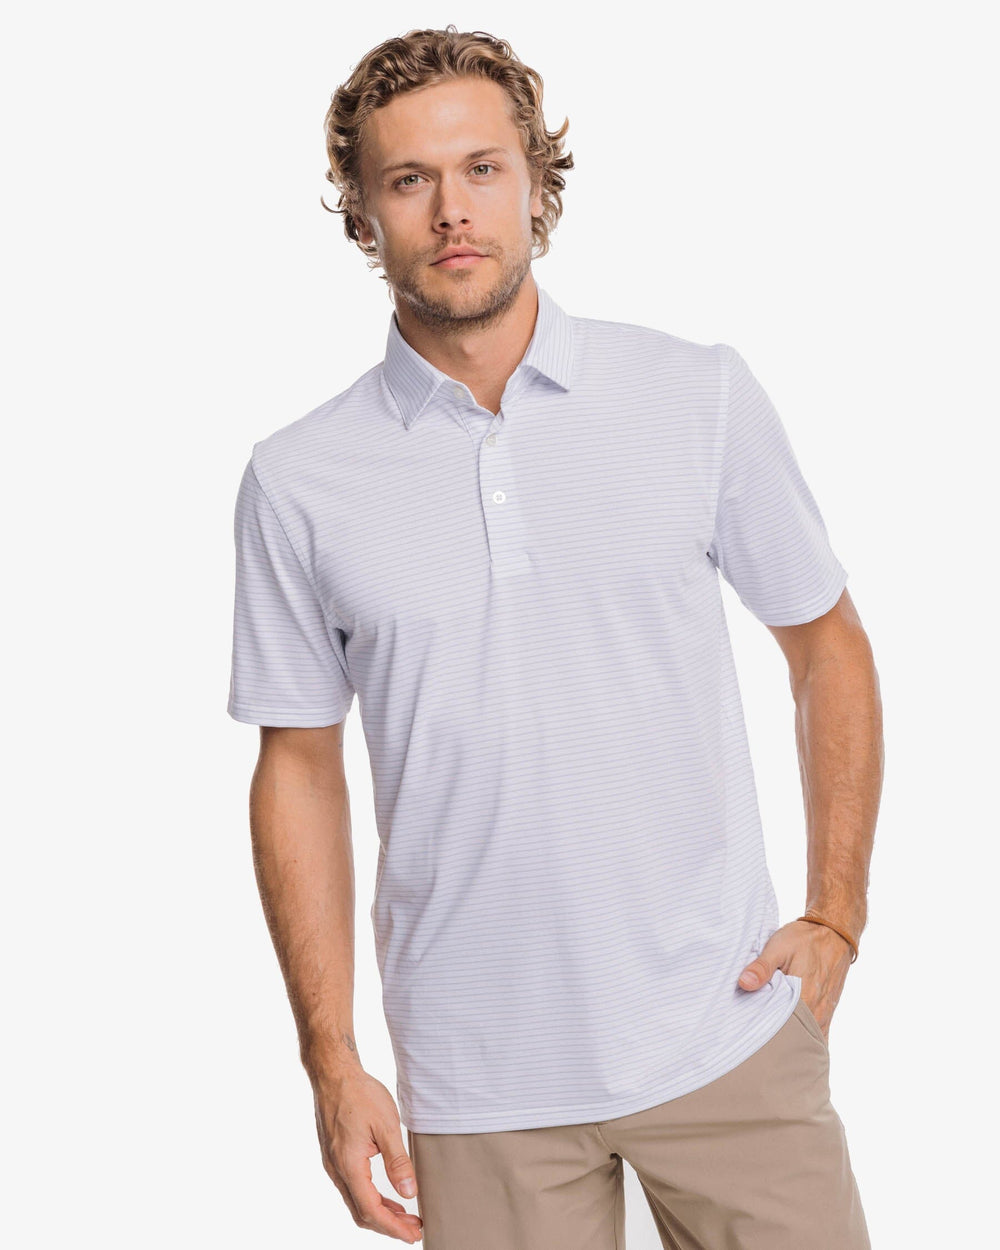 The front view of the Southern Tide Driver Mayfair Performance Polo Shirt by Southern Tide - Classic White